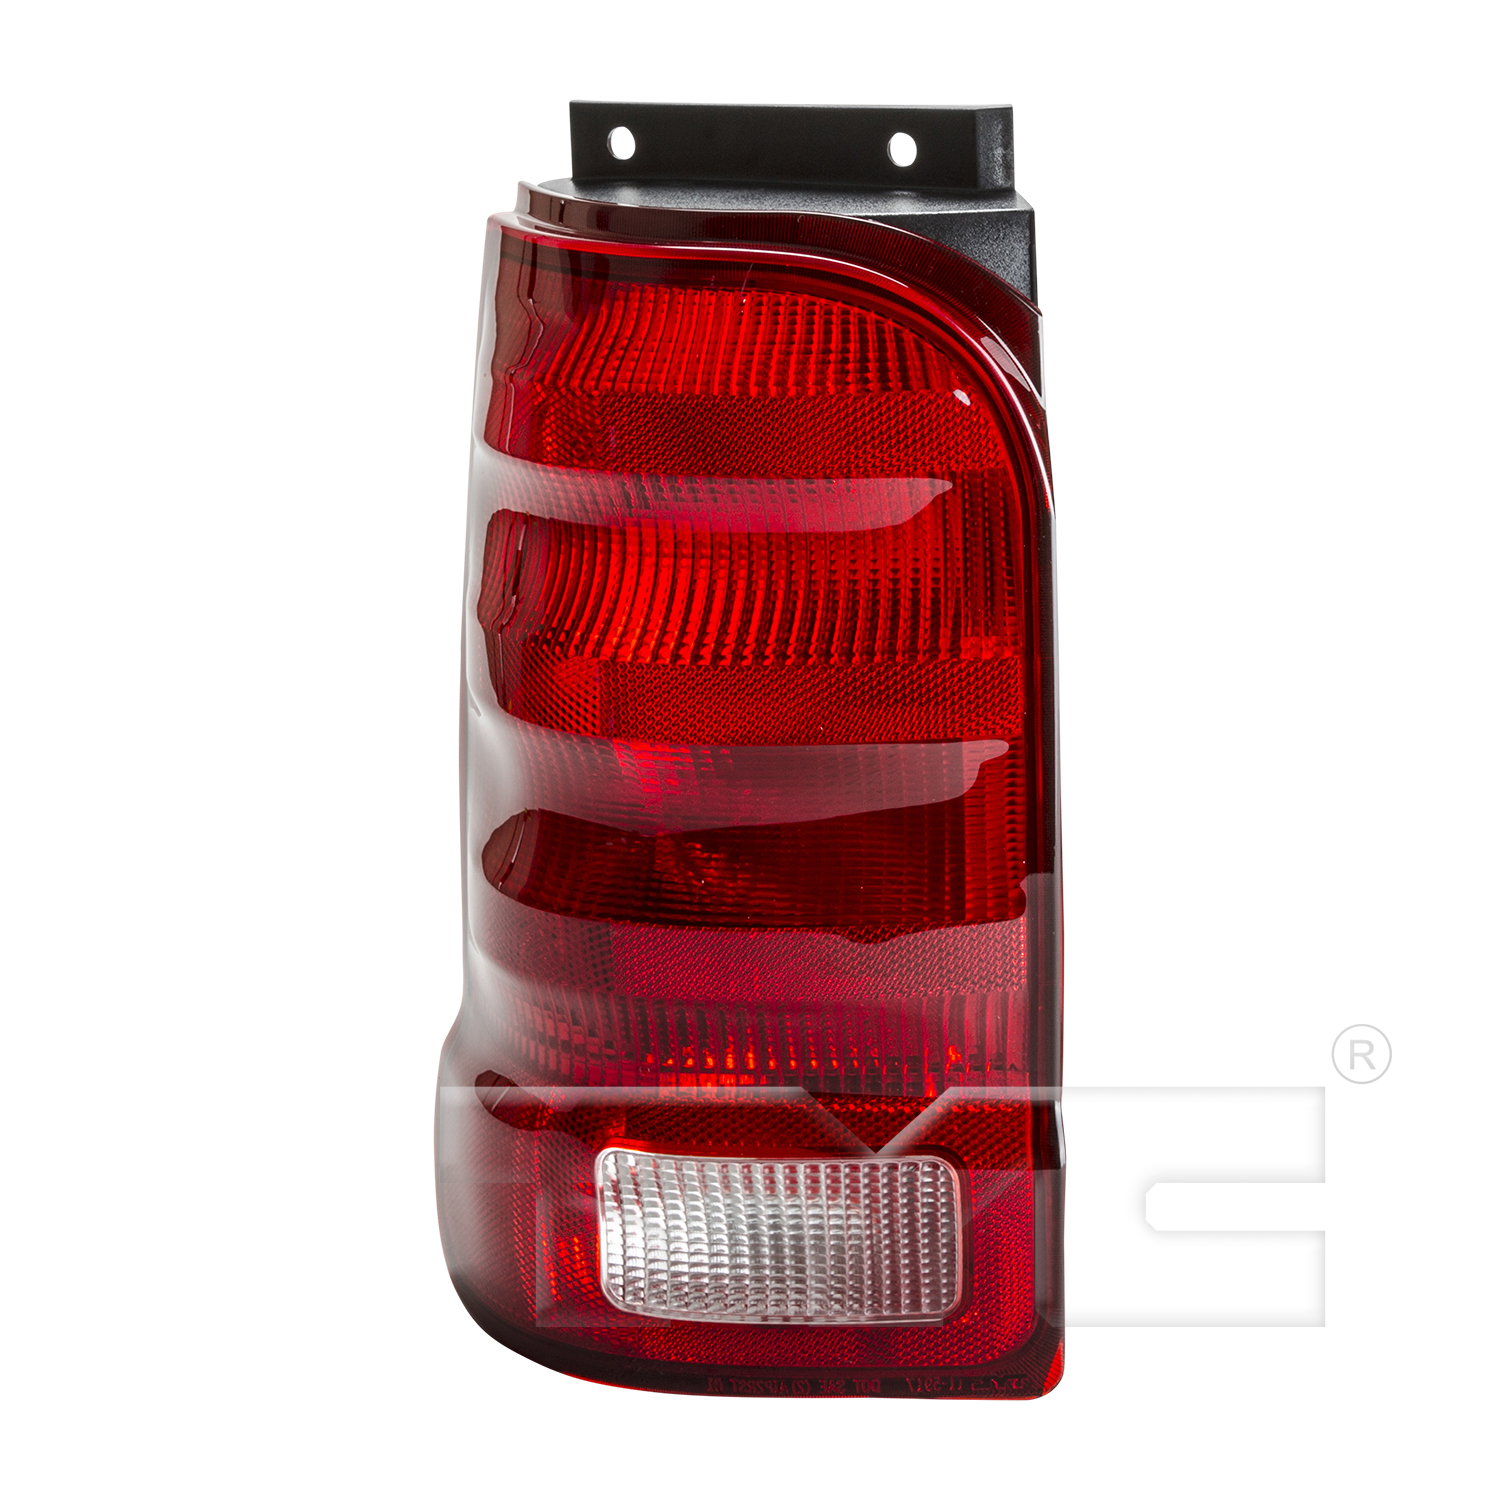 Aftermarket TAILLIGHTS for FORD - EXPLORER, EXPLORER,01-03,LT Taillamp assy